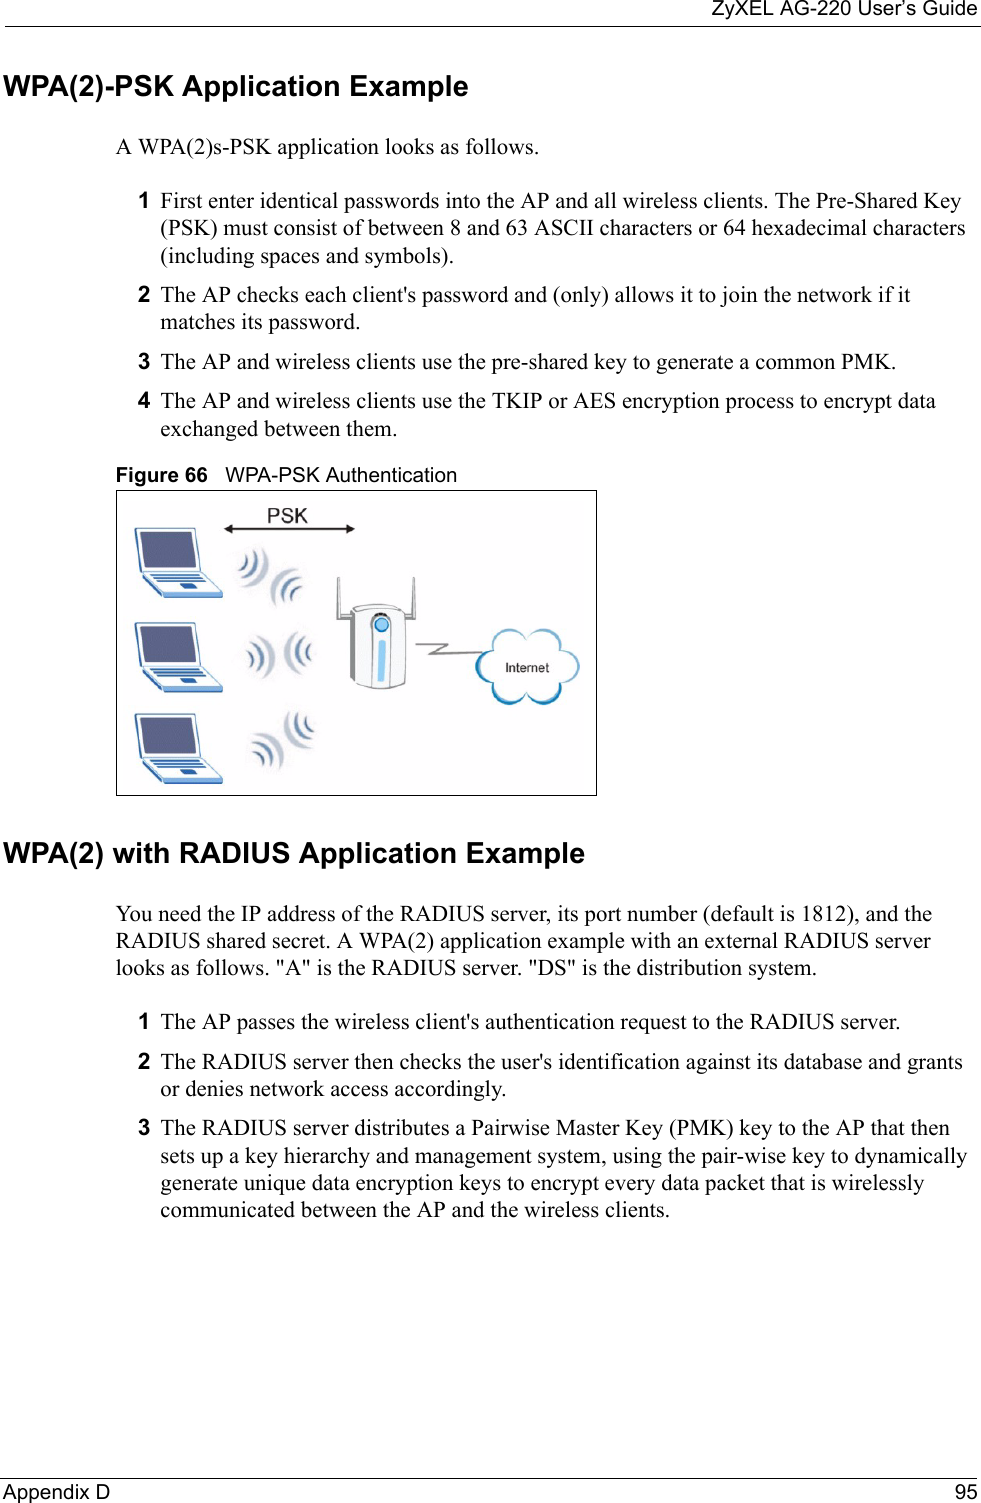 ZyXEL AG-220 User’s GuideAppendix D 95WPA(2)-PSK Application ExampleA WPA(2)s-PSK application looks as follows.1First enter identical passwords into the AP and all wireless clients. The Pre-Shared Key (PSK) must consist of between 8 and 63 ASCII characters or 64 hexadecimal characters (including spaces and symbols).2The AP checks each client&apos;s password and (only) allows it to join the network if it matches its password.3The AP and wireless clients use the pre-shared key to generate a common PMK.4The AP and wireless clients use the TKIP or AES encryption process to encrypt data exchanged between them.Figure 66   WPA-PSK AuthenticationWPA(2) with RADIUS Application ExampleYou need the IP address of the RADIUS server, its port number (default is 1812), and the RADIUS shared secret. A WPA(2) application example with an external RADIUS server looks as follows. &quot;A&quot; is the RADIUS server. &quot;DS&quot; is the distribution system.1The AP passes the wireless client&apos;s authentication request to the RADIUS server.2The RADIUS server then checks the user&apos;s identification against its database and grants or denies network access accordingly.3The RADIUS server distributes a Pairwise Master Key (PMK) key to the AP that then sets up a key hierarchy and management system, using the pair-wise key to dynamically generate unique data encryption keys to encrypt every data packet that is wirelessly communicated between the AP and the wireless clients.